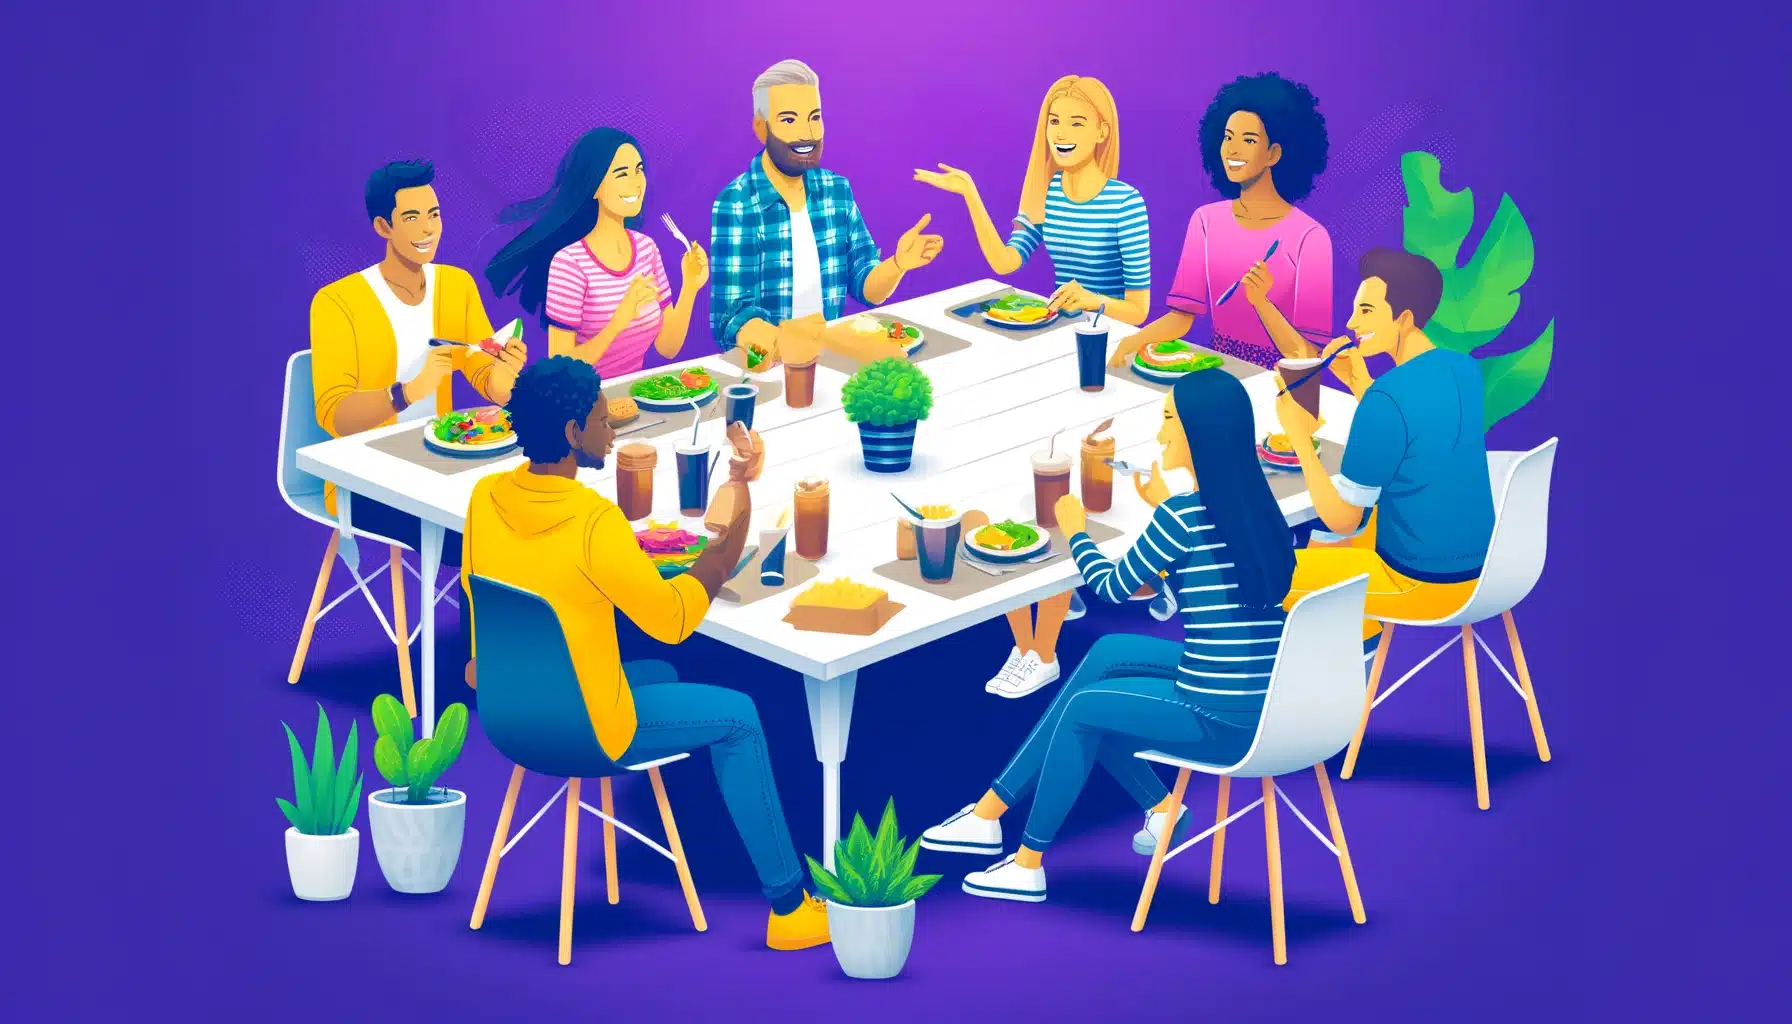 Creating-a-Lunch-Buddy-Network-A-16_9-image-with-a-purple-background-featuring-a-vibrant-and-social-lunch-scene.-The-image-includes-diverse-individuals-sitting-together-at-a-modern